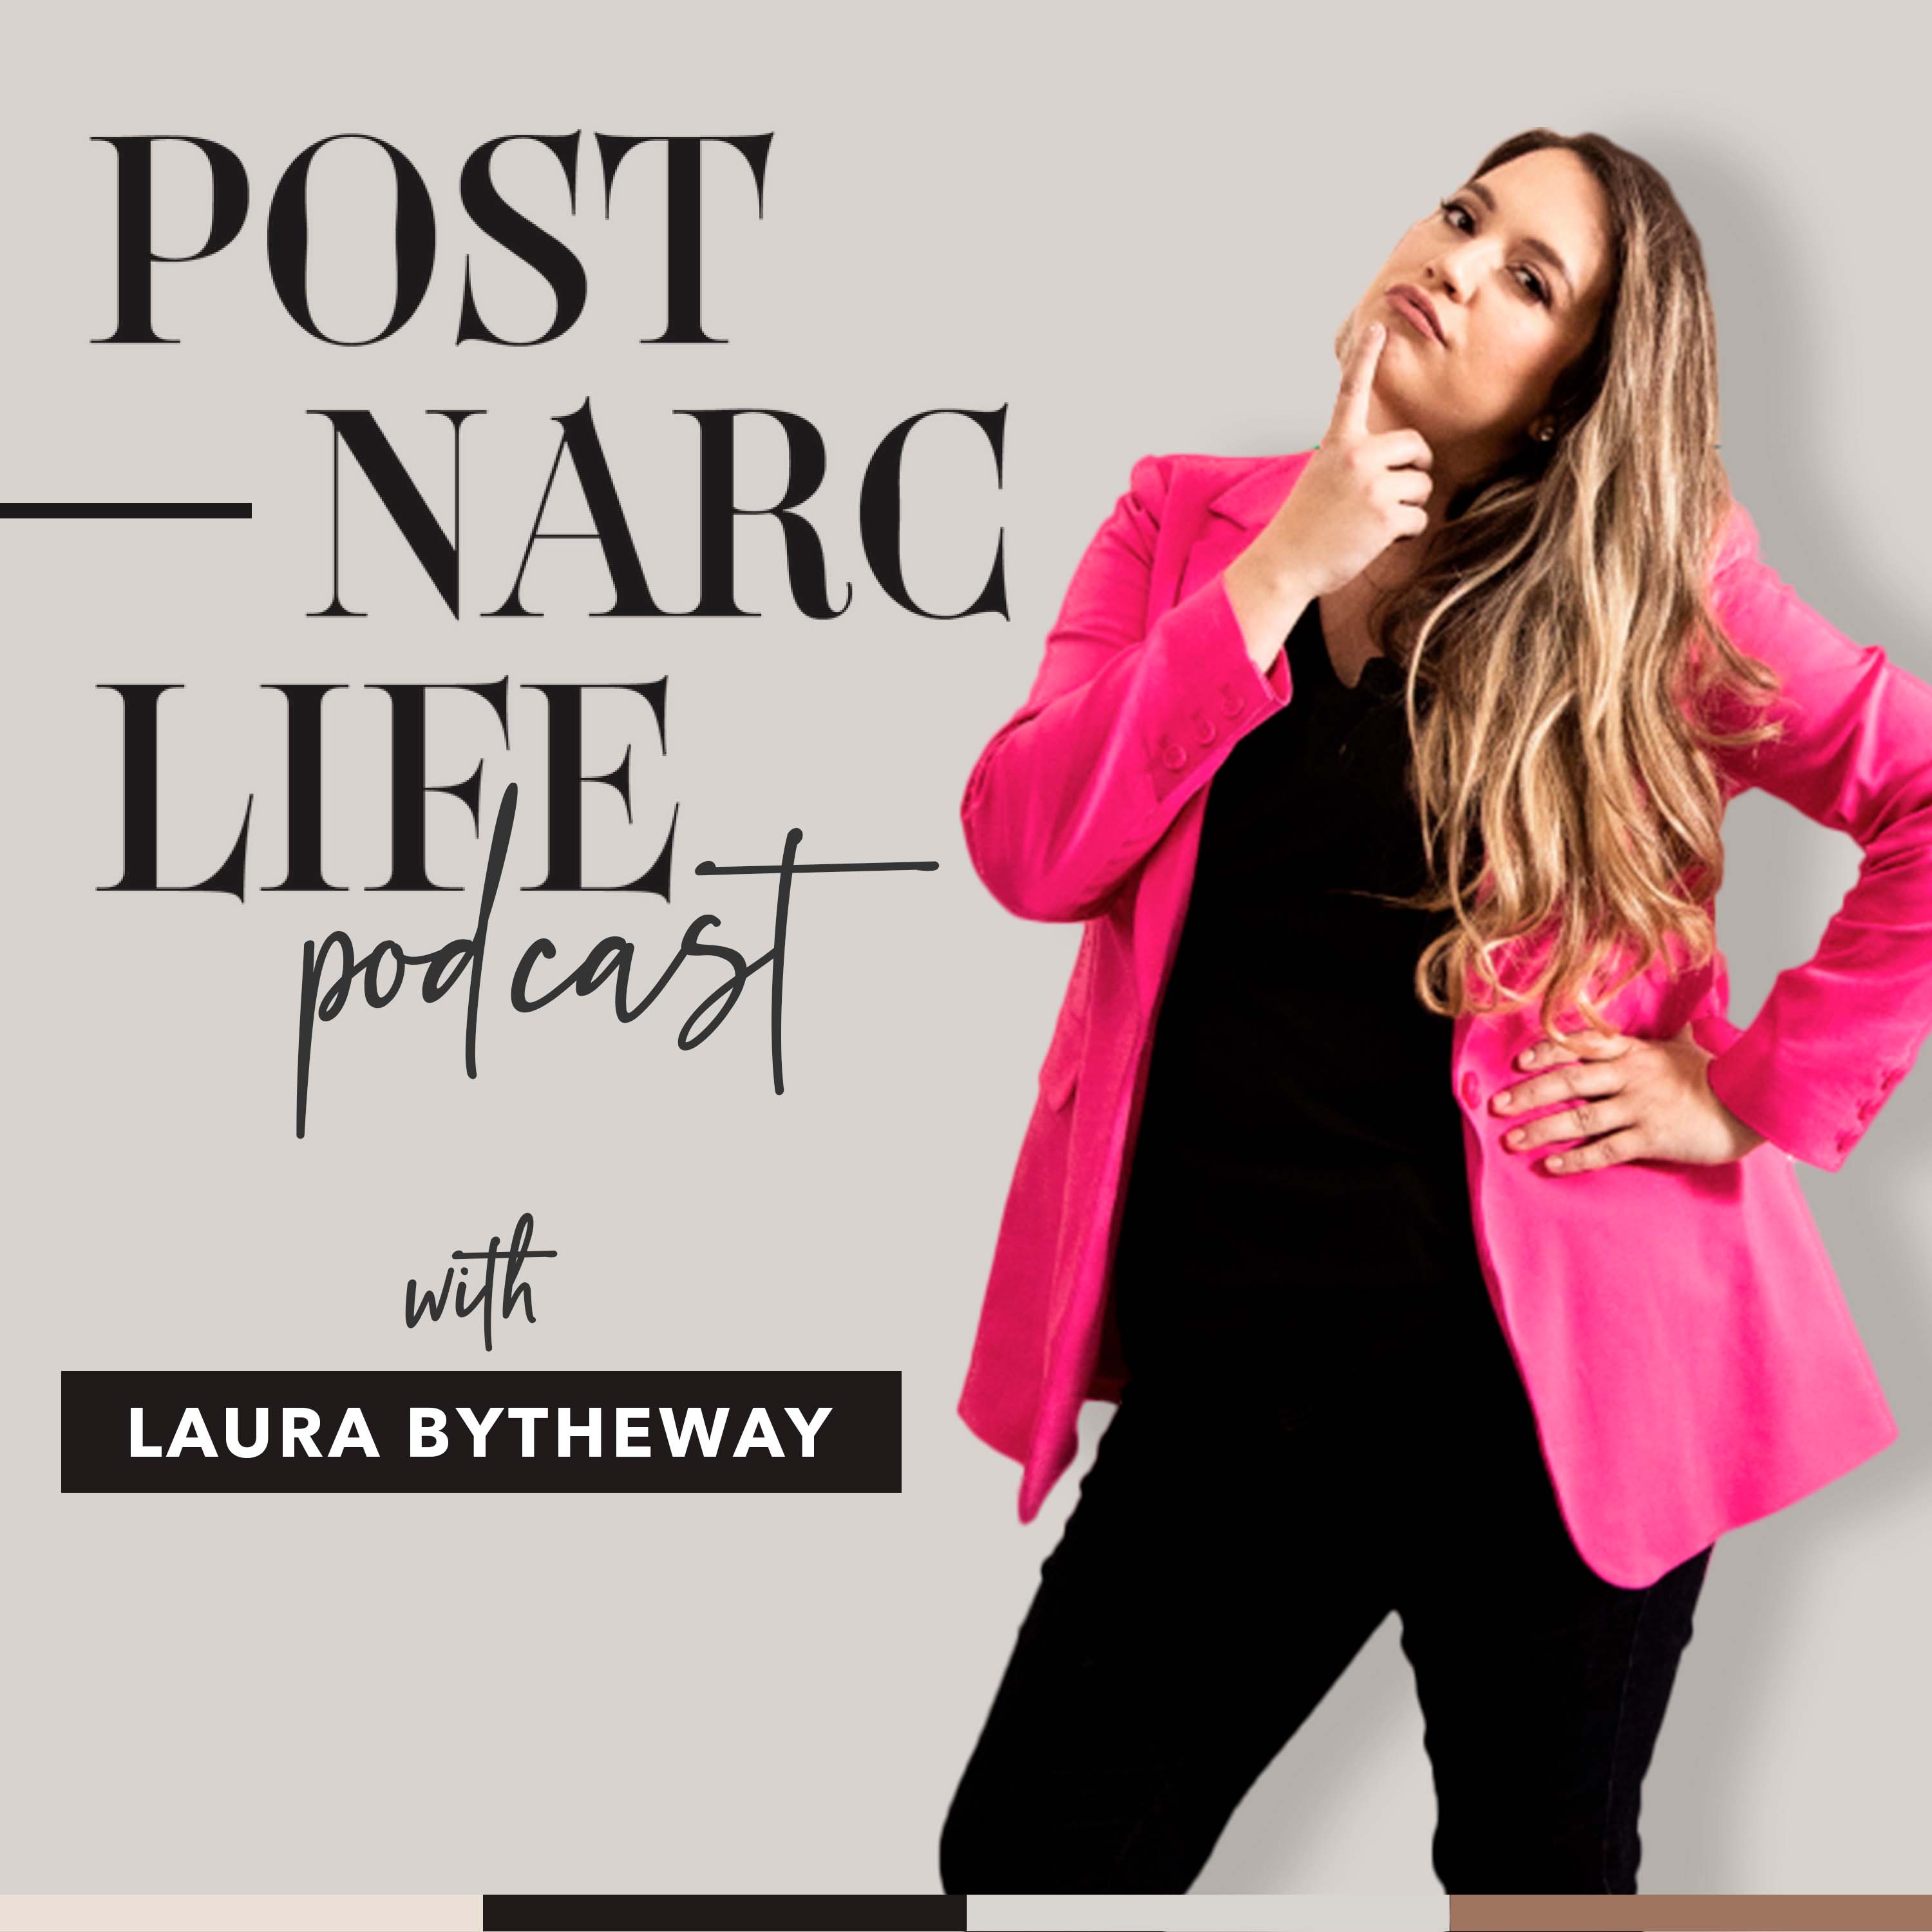 1. How to Create a Post-Narc Life